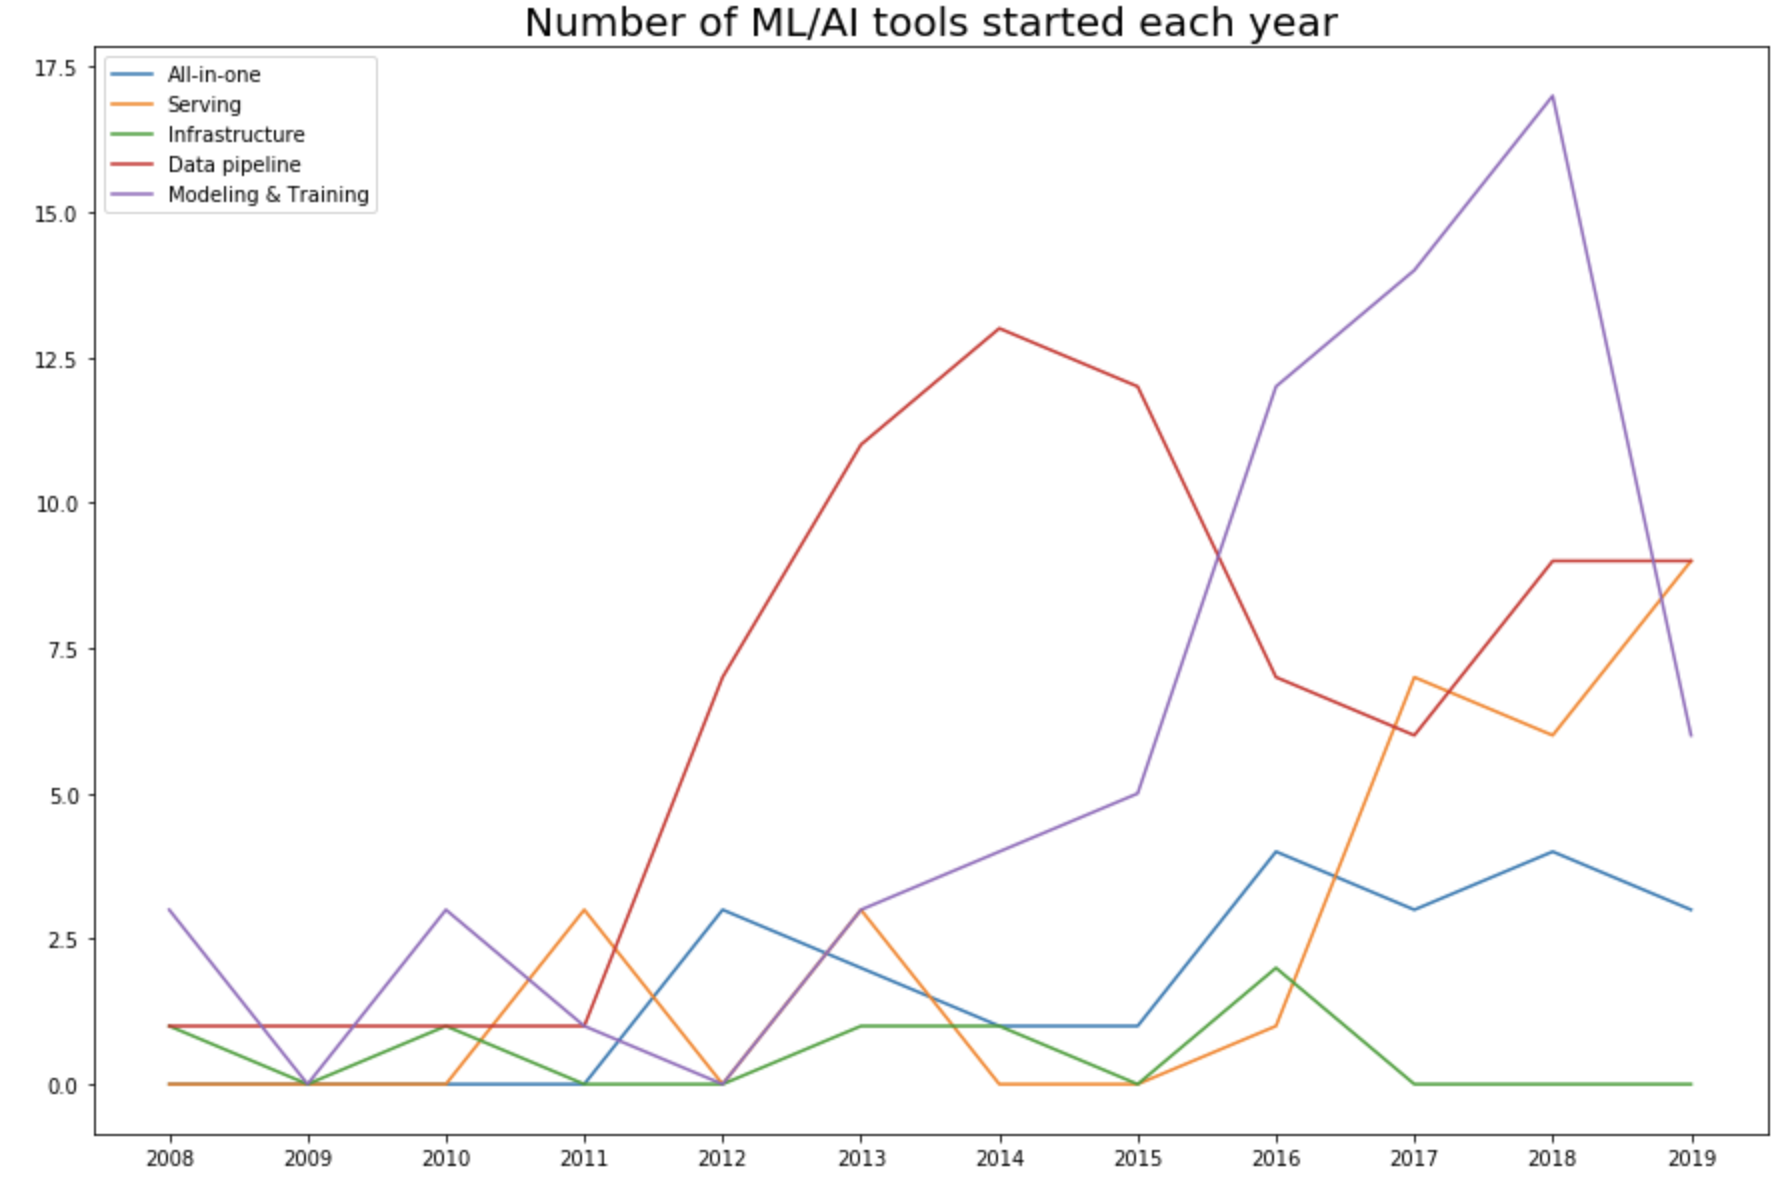 Number of tools started each year